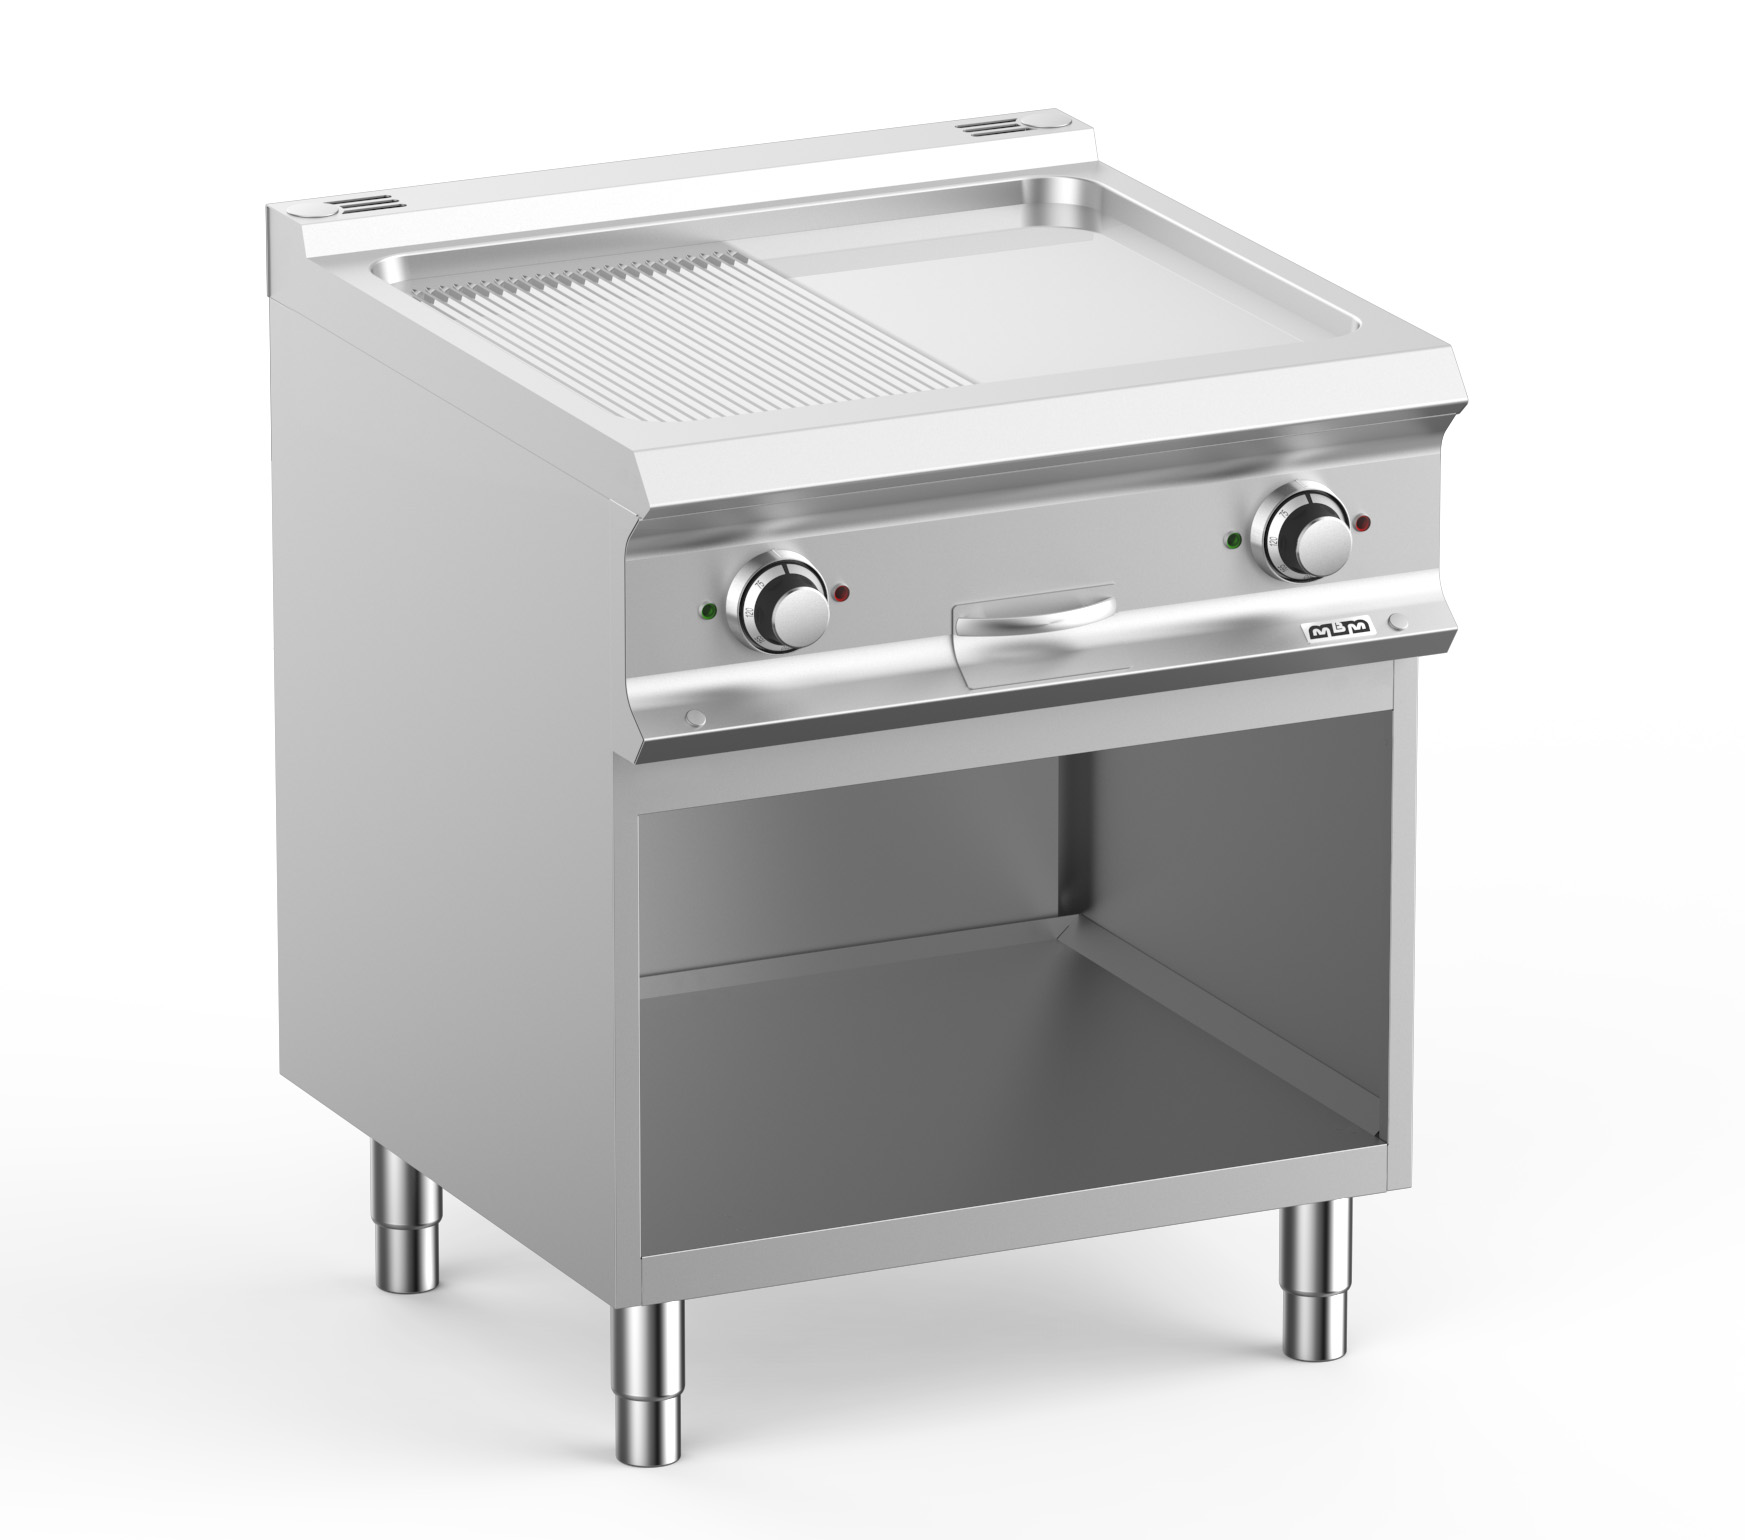 Domina Pro 700 FTBE77ALRC Freestanding 1/2 Chrome Smooth 1/2 Ribbed Plate Electric Fry Top